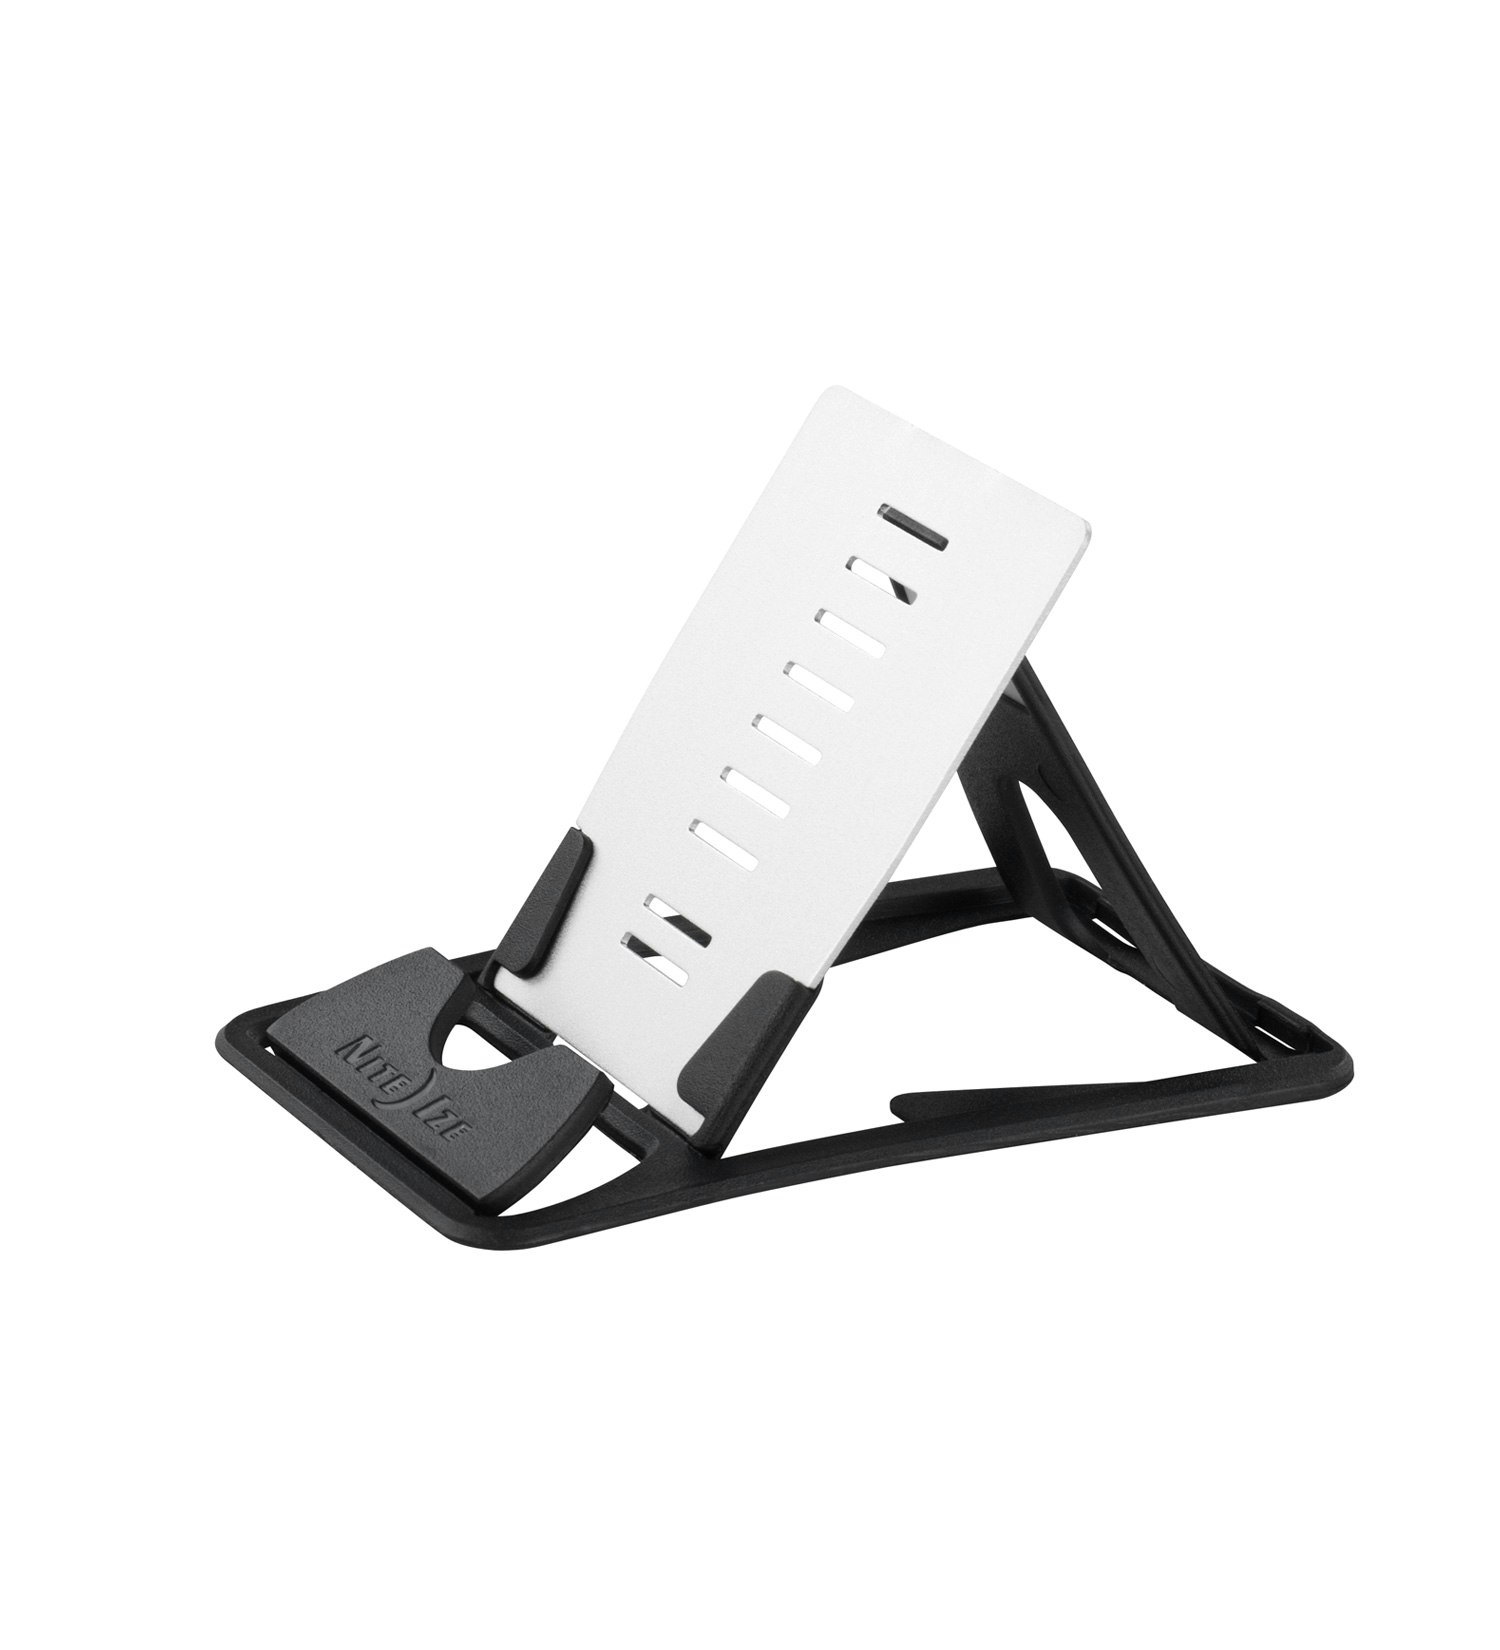 Nite Ize(r) QuikStand(r) Mobile Device Stand